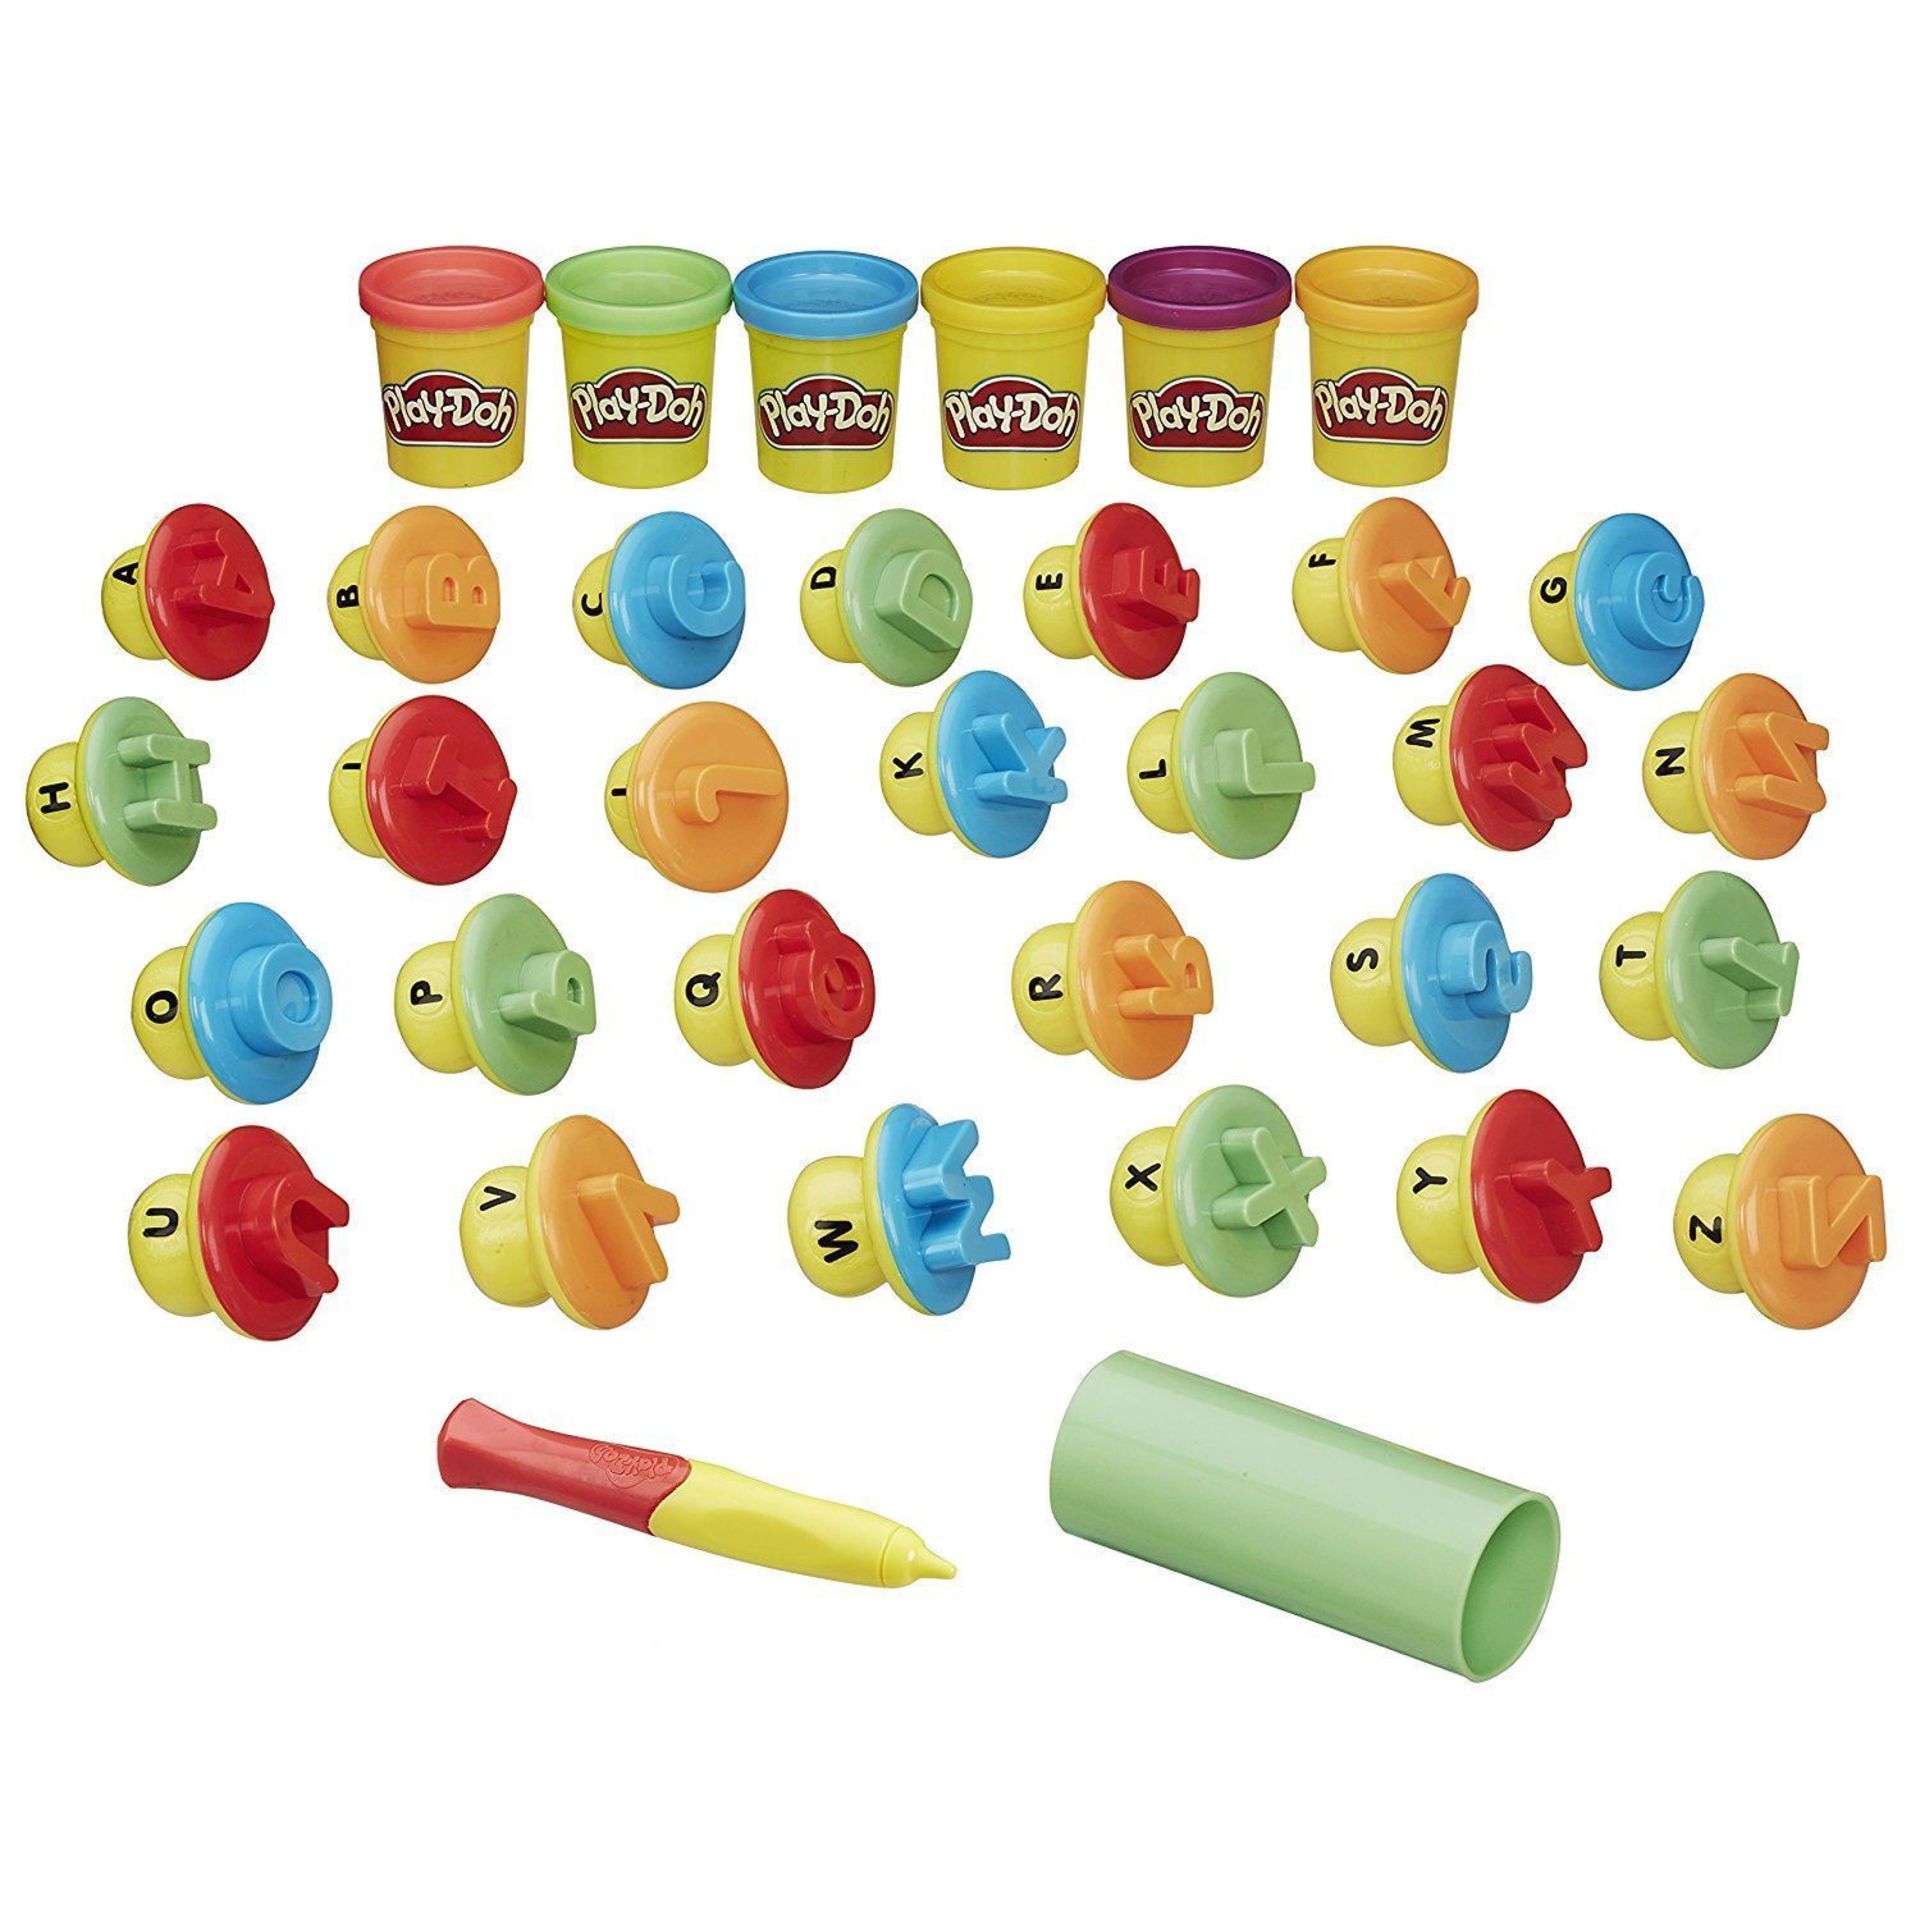 V Brand New Play-Doh Shape & Learn Letters and Language - JohnLewis.com Price £25.47 - Easy For - Image 2 of 2